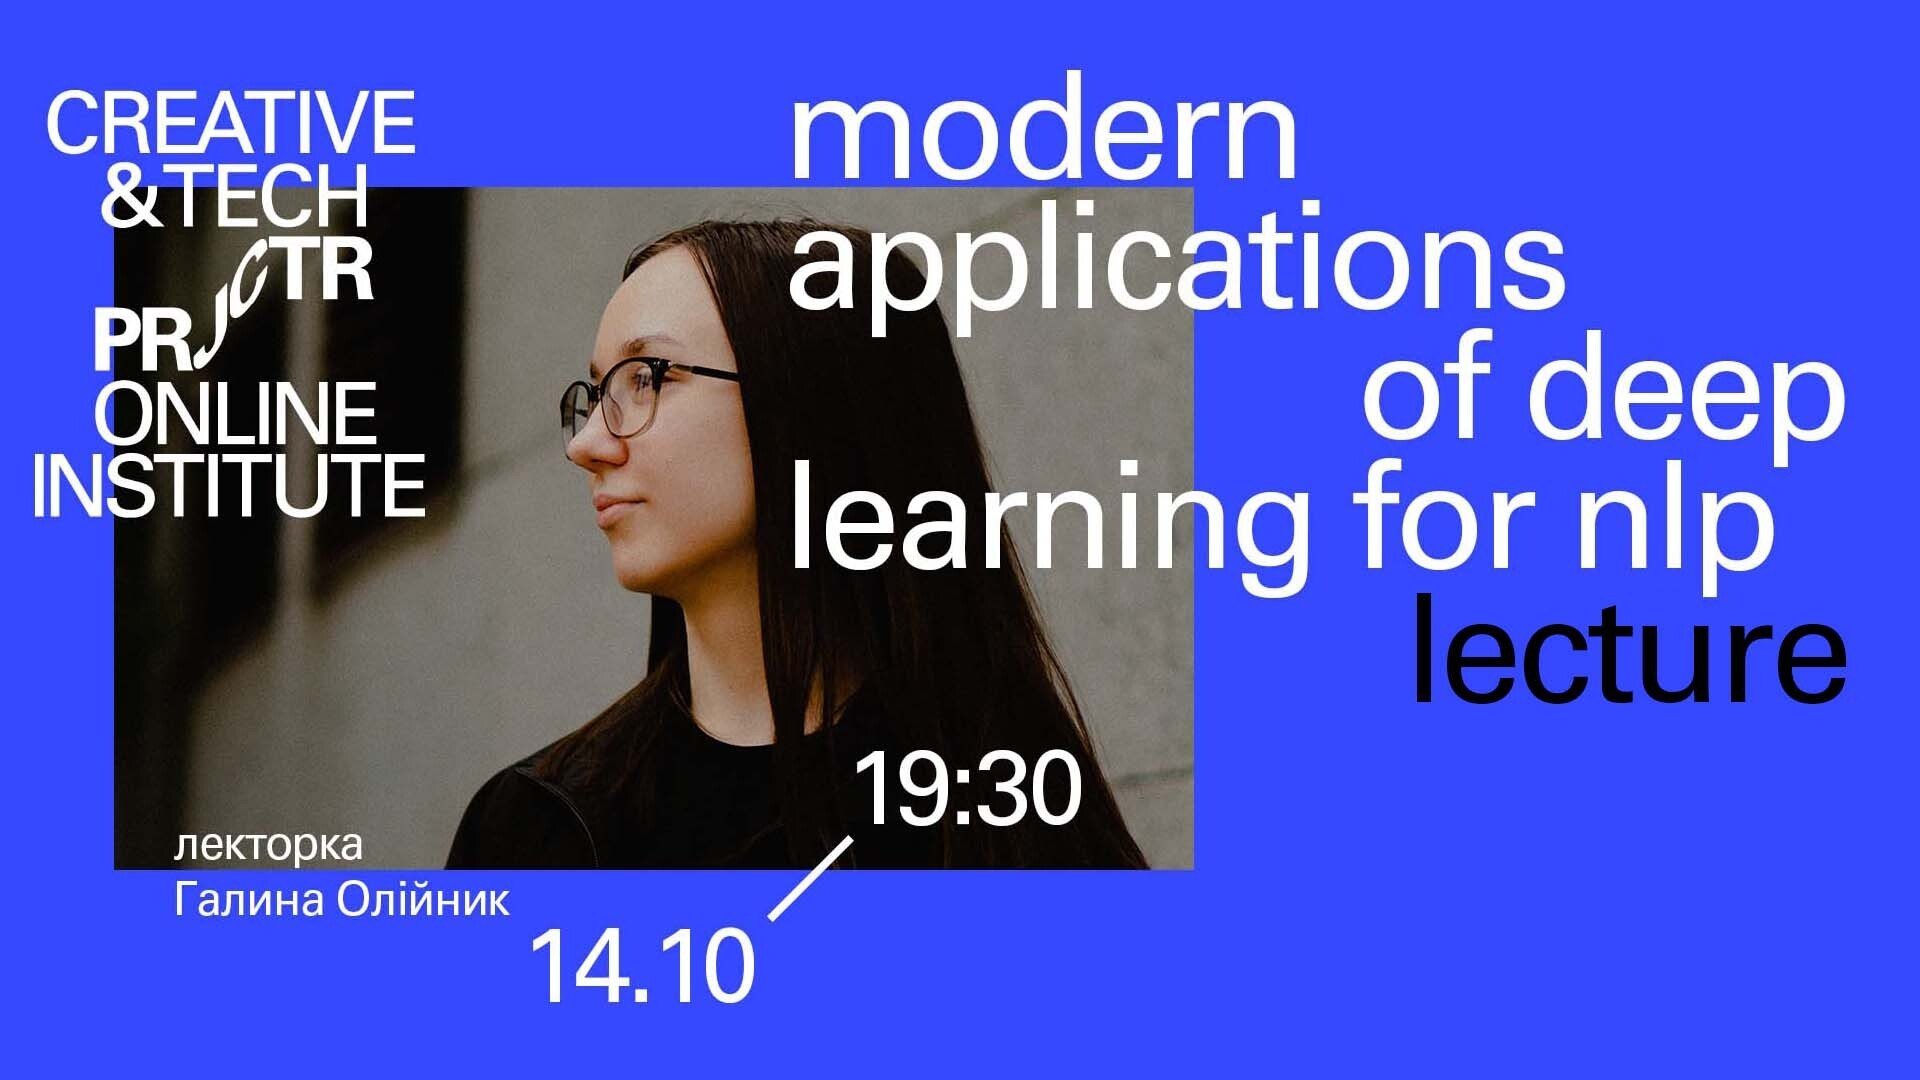 "Modern applications of deep learning for NLP"